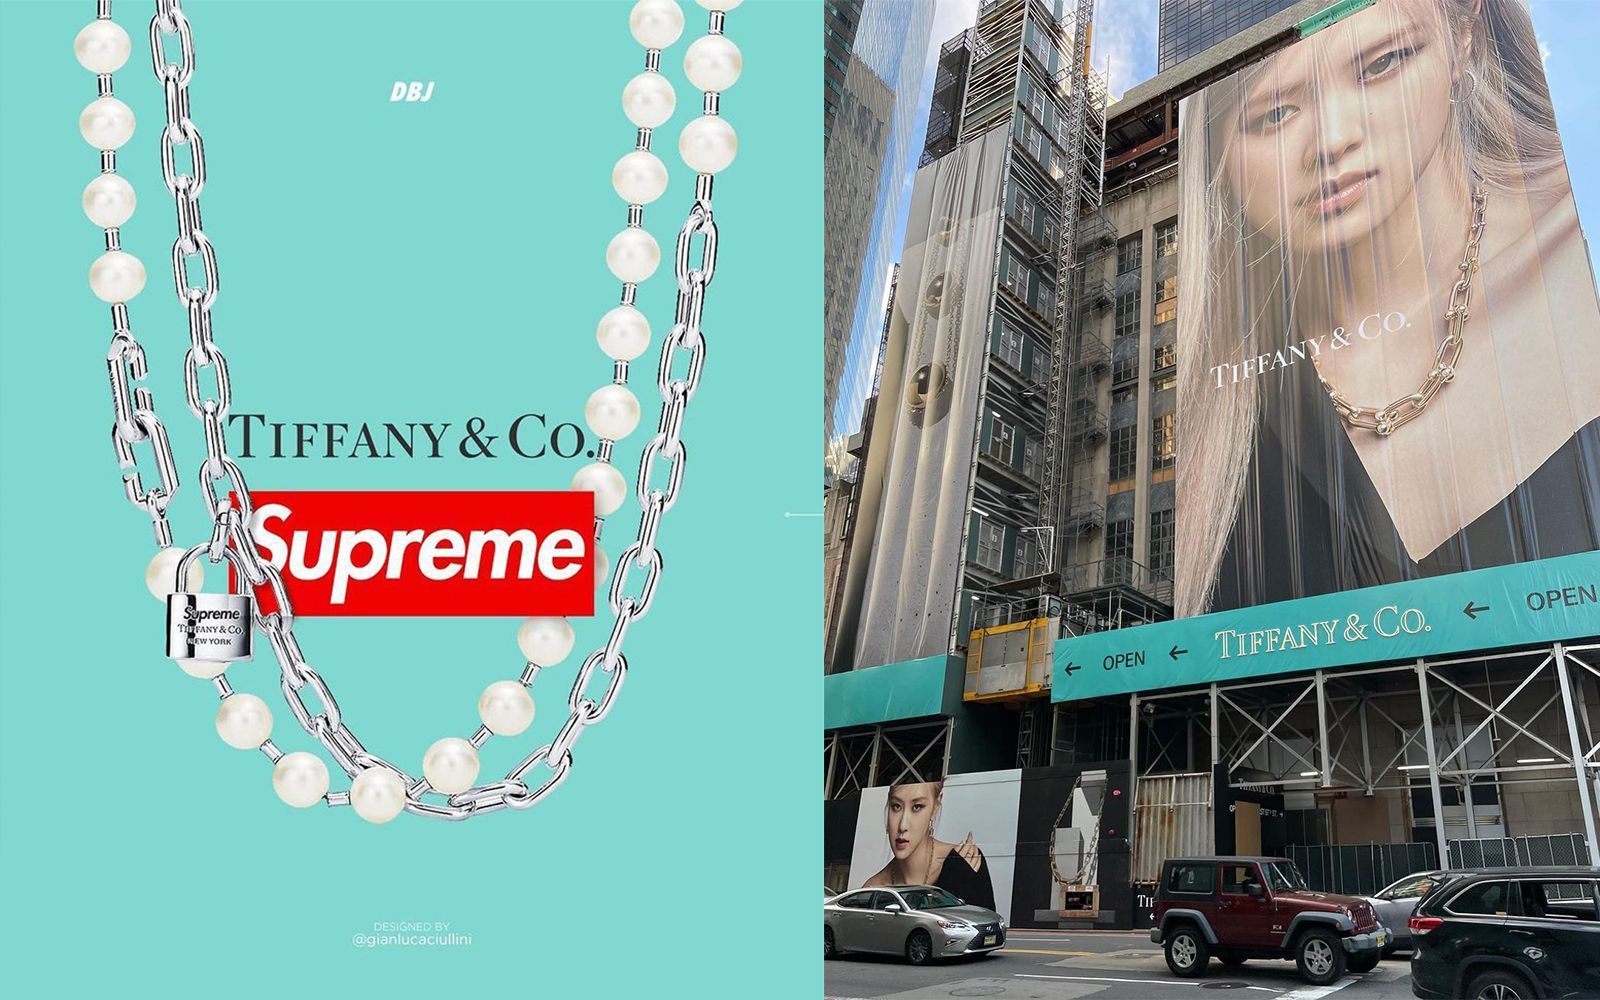 What does Supreme X Tiffany Co. mean?